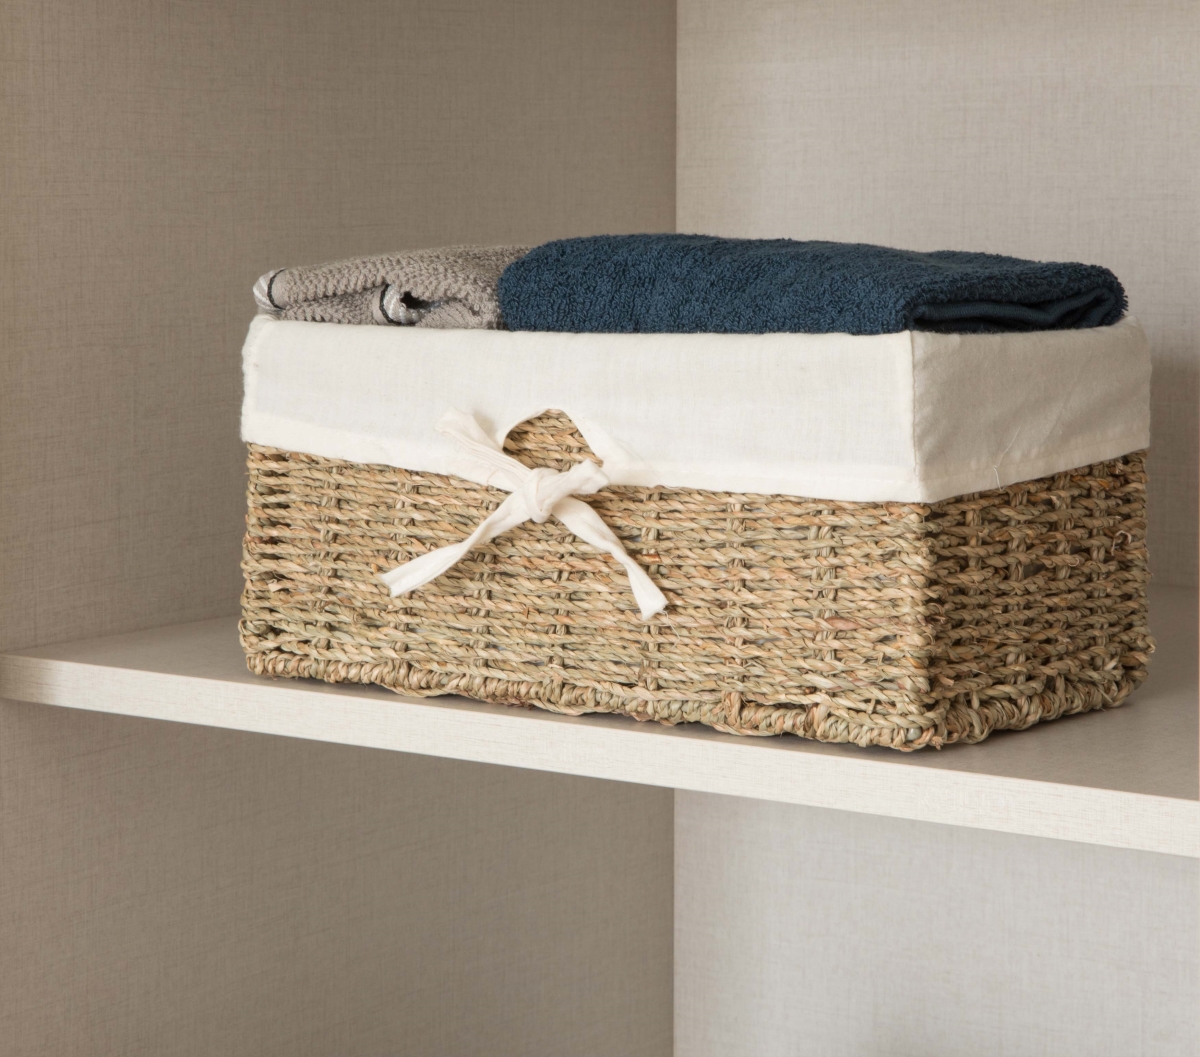 Picture of Vintiquewise QI003084 5.3 x 12 x 6.5 in. Seagrass Shelf Basket Lined with White Lining, Brown